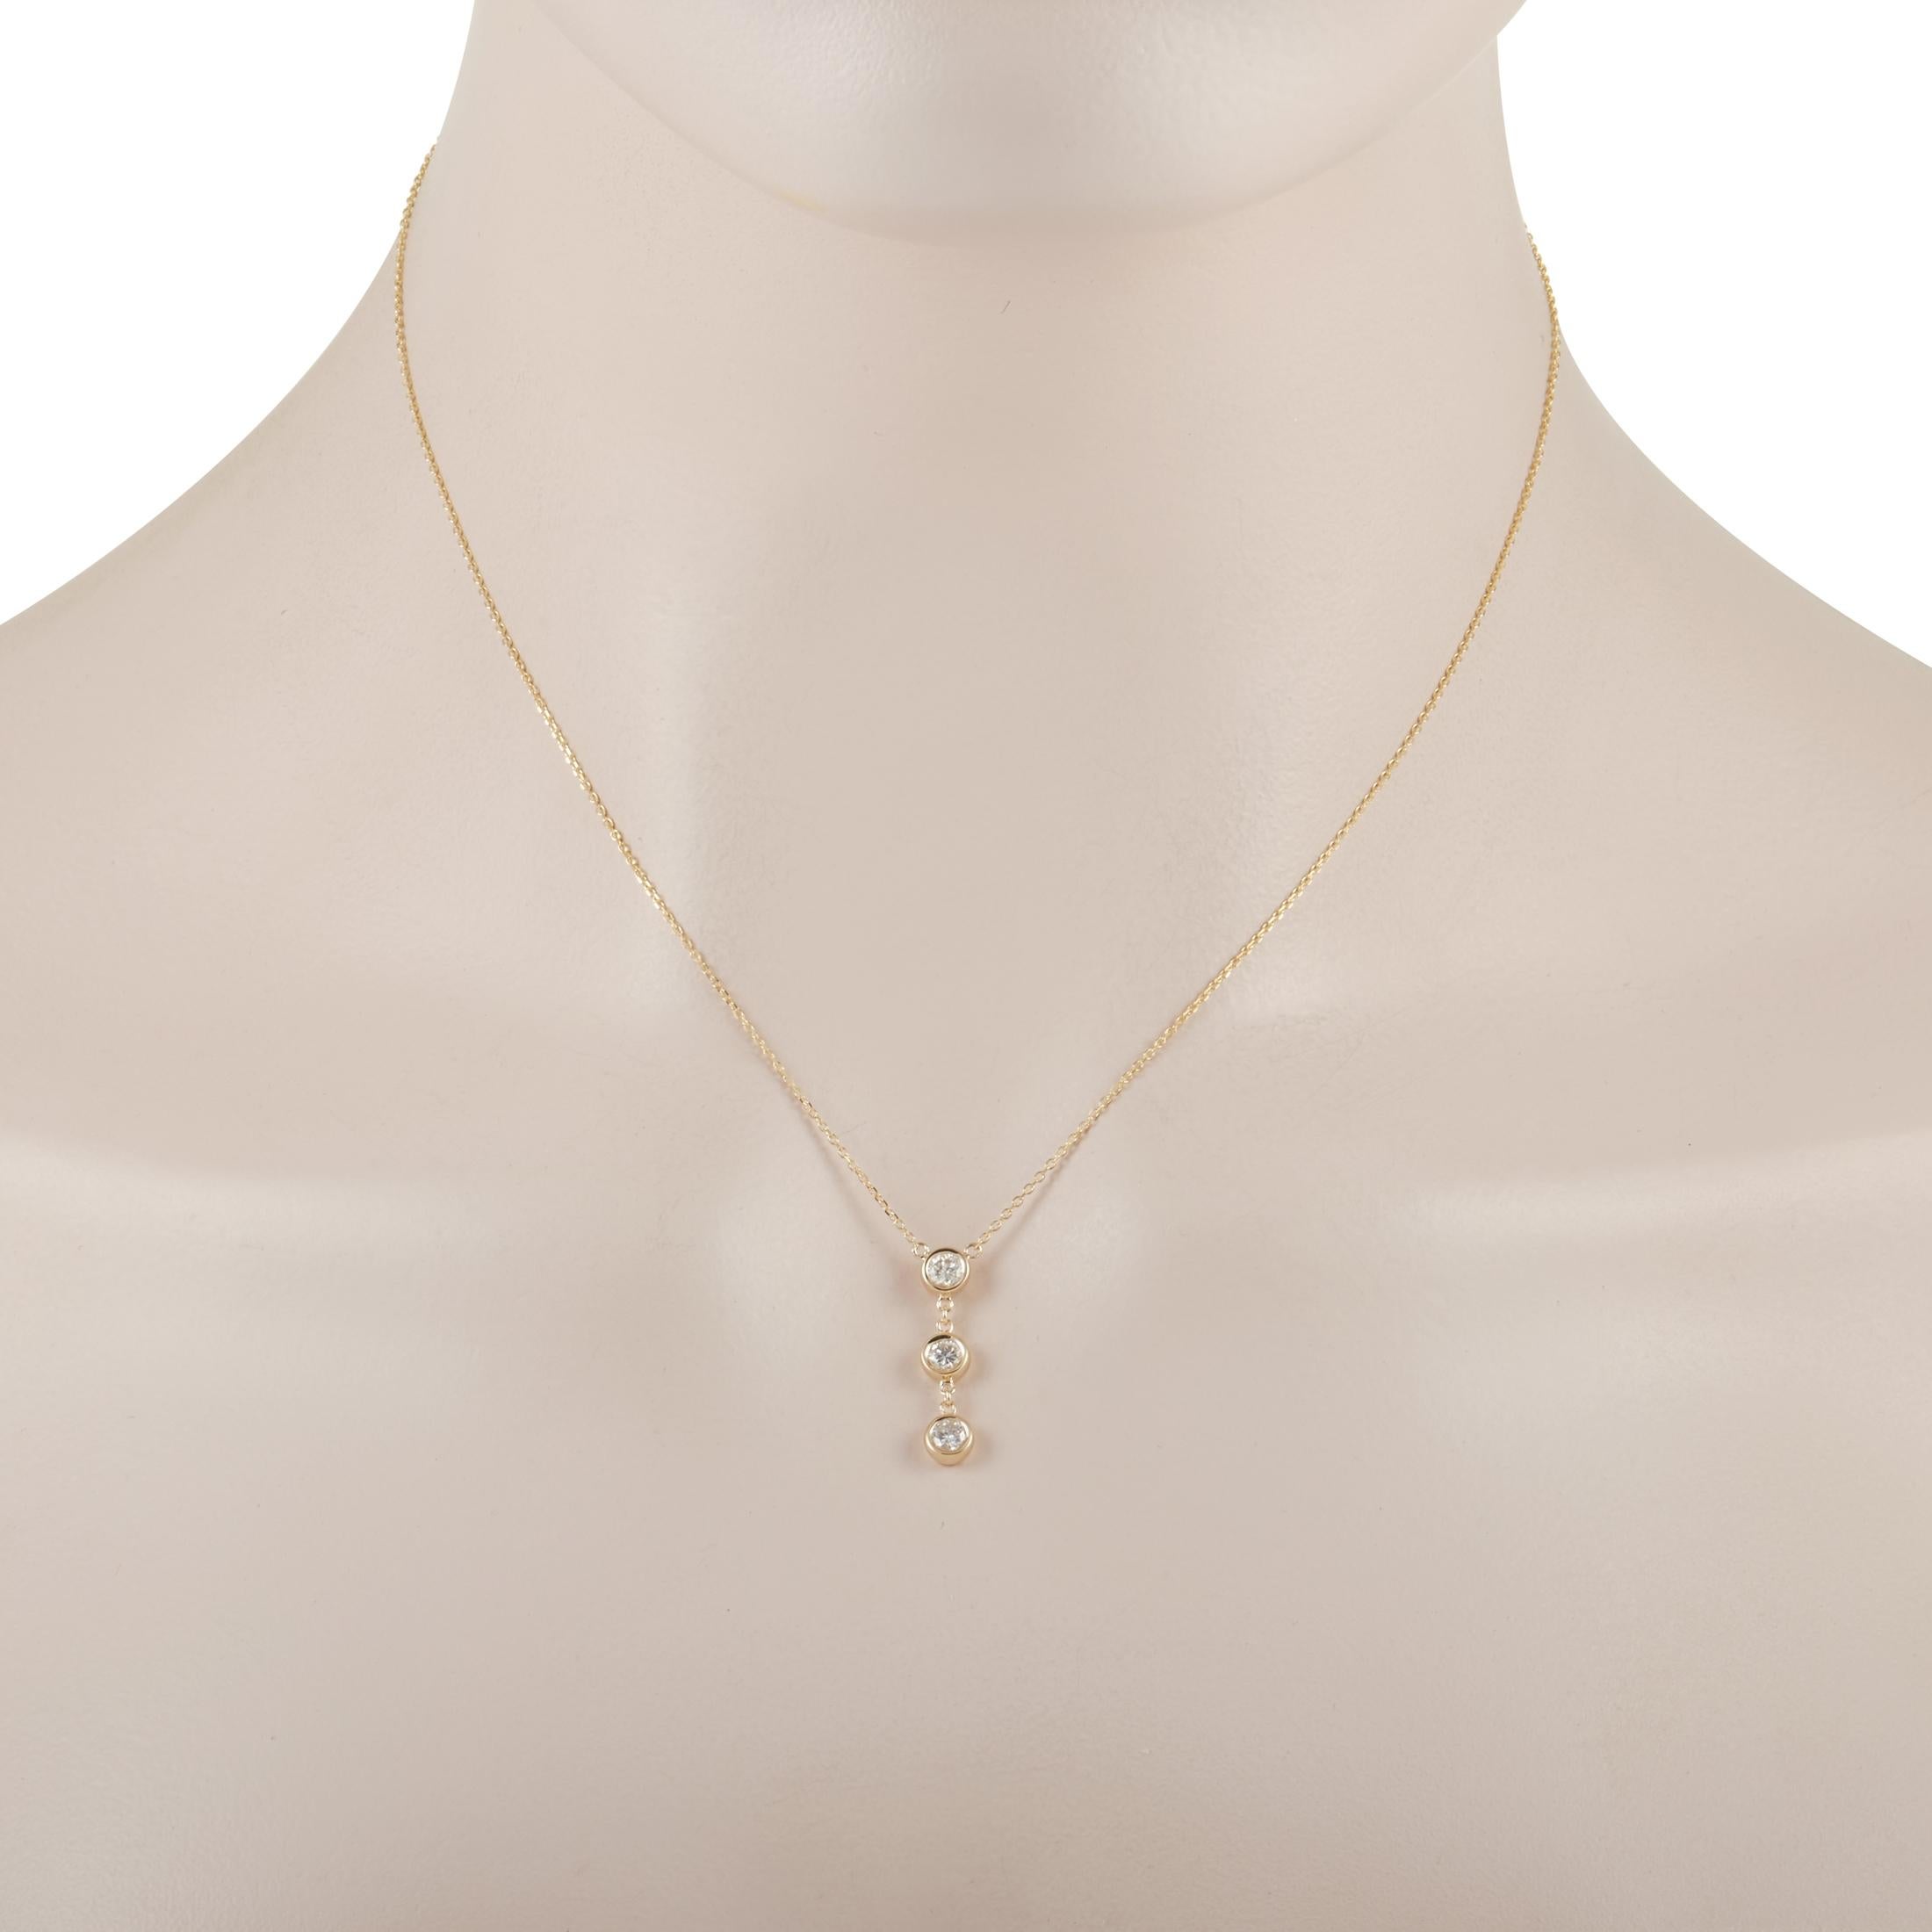 Glittering diamonds and 14K Yellow Gold pair together beautifully on this contemporary pendant necklace. The sleek, streamlined pendant - which measures .75” long and .19” wide - adds just a hint of thanks to the presence of three bezel-set diamonds